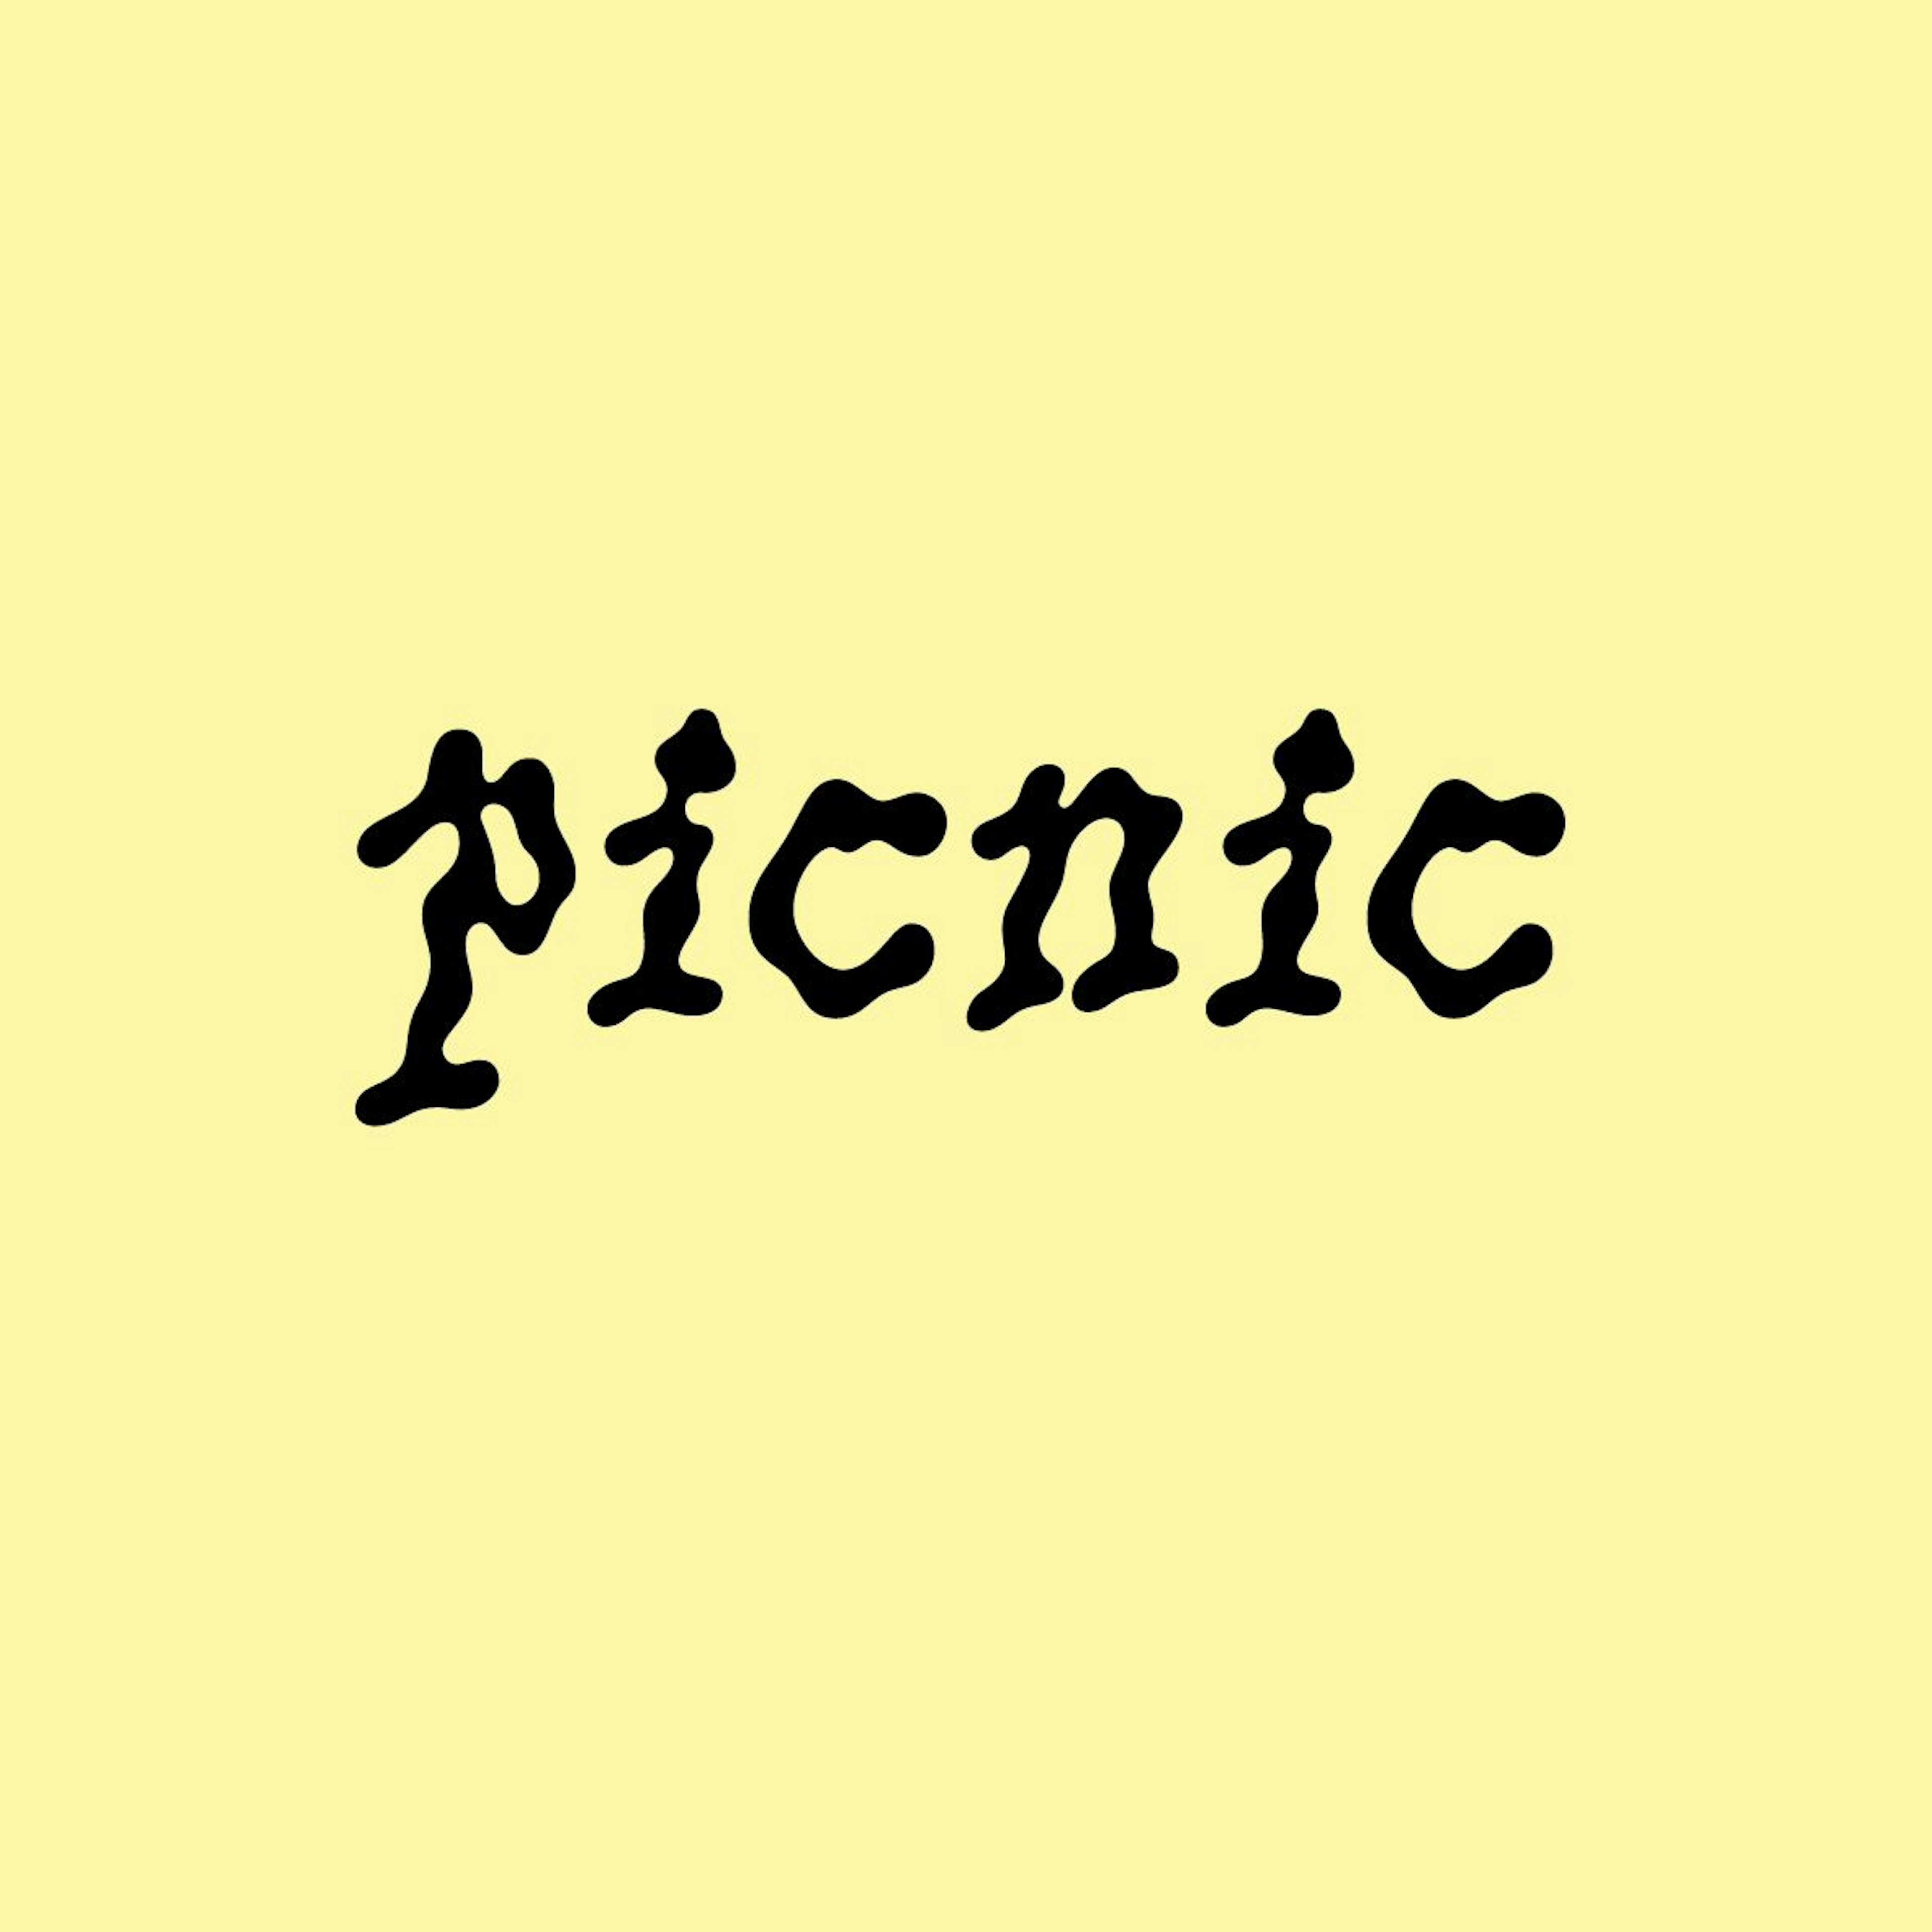 picnic title in 'wobbly' font against pale yellow background